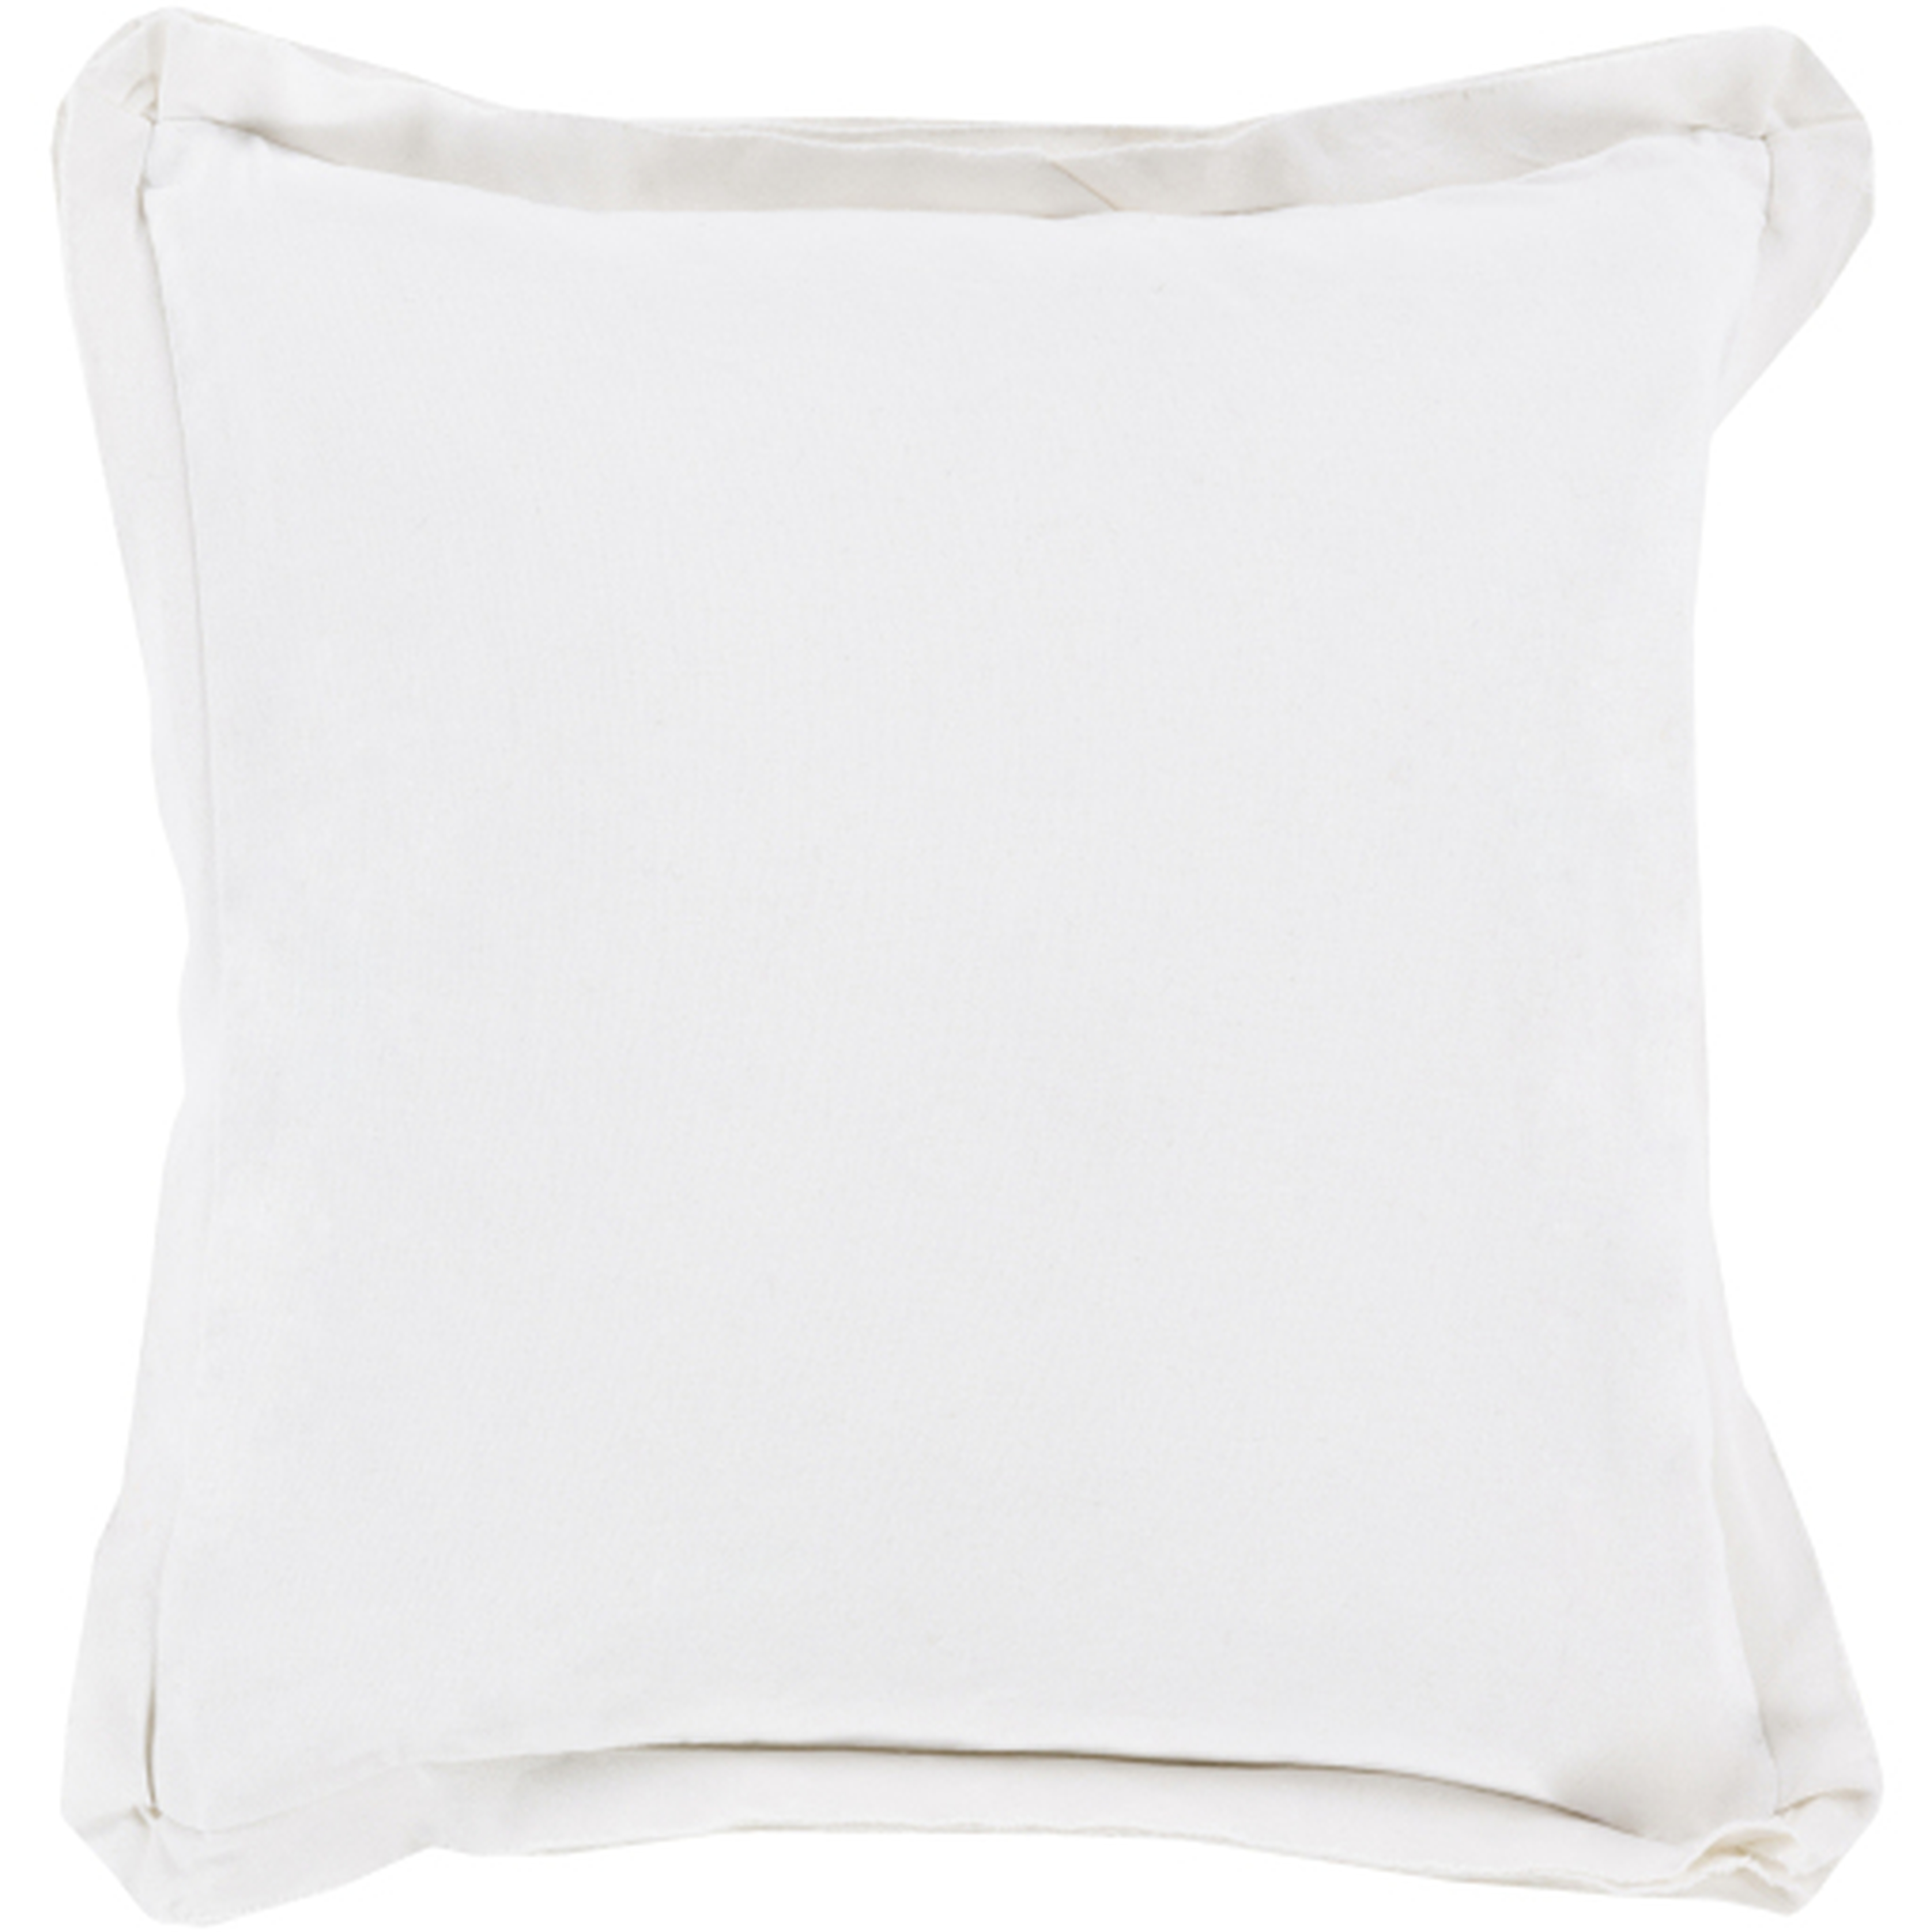 Triple Flange Throw Pillow, 18" x 18", pillow cover only - Surya